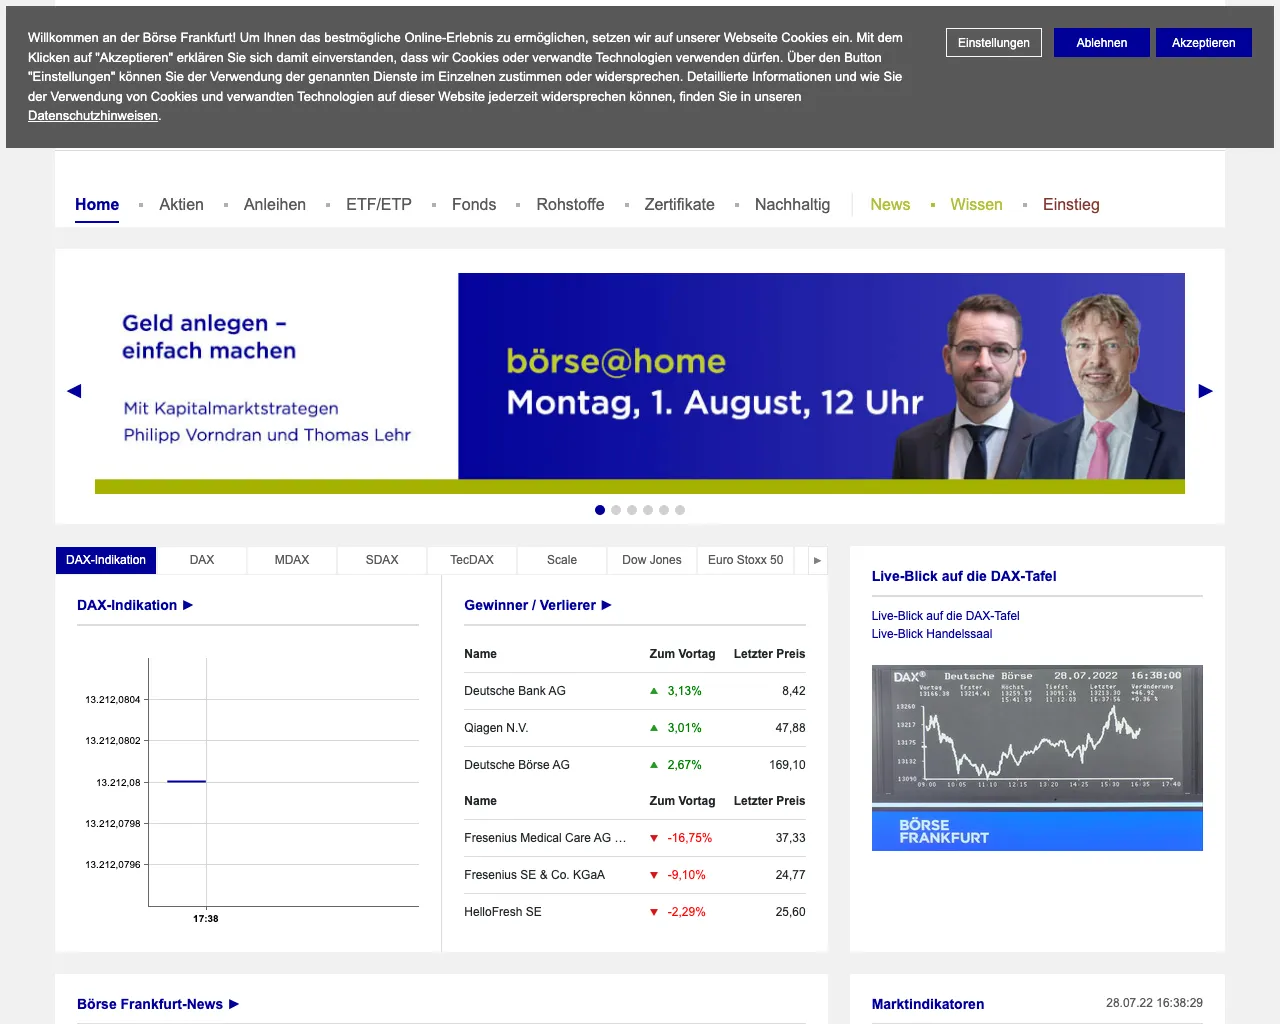 The Börse Frankfurt site with a cookie banner